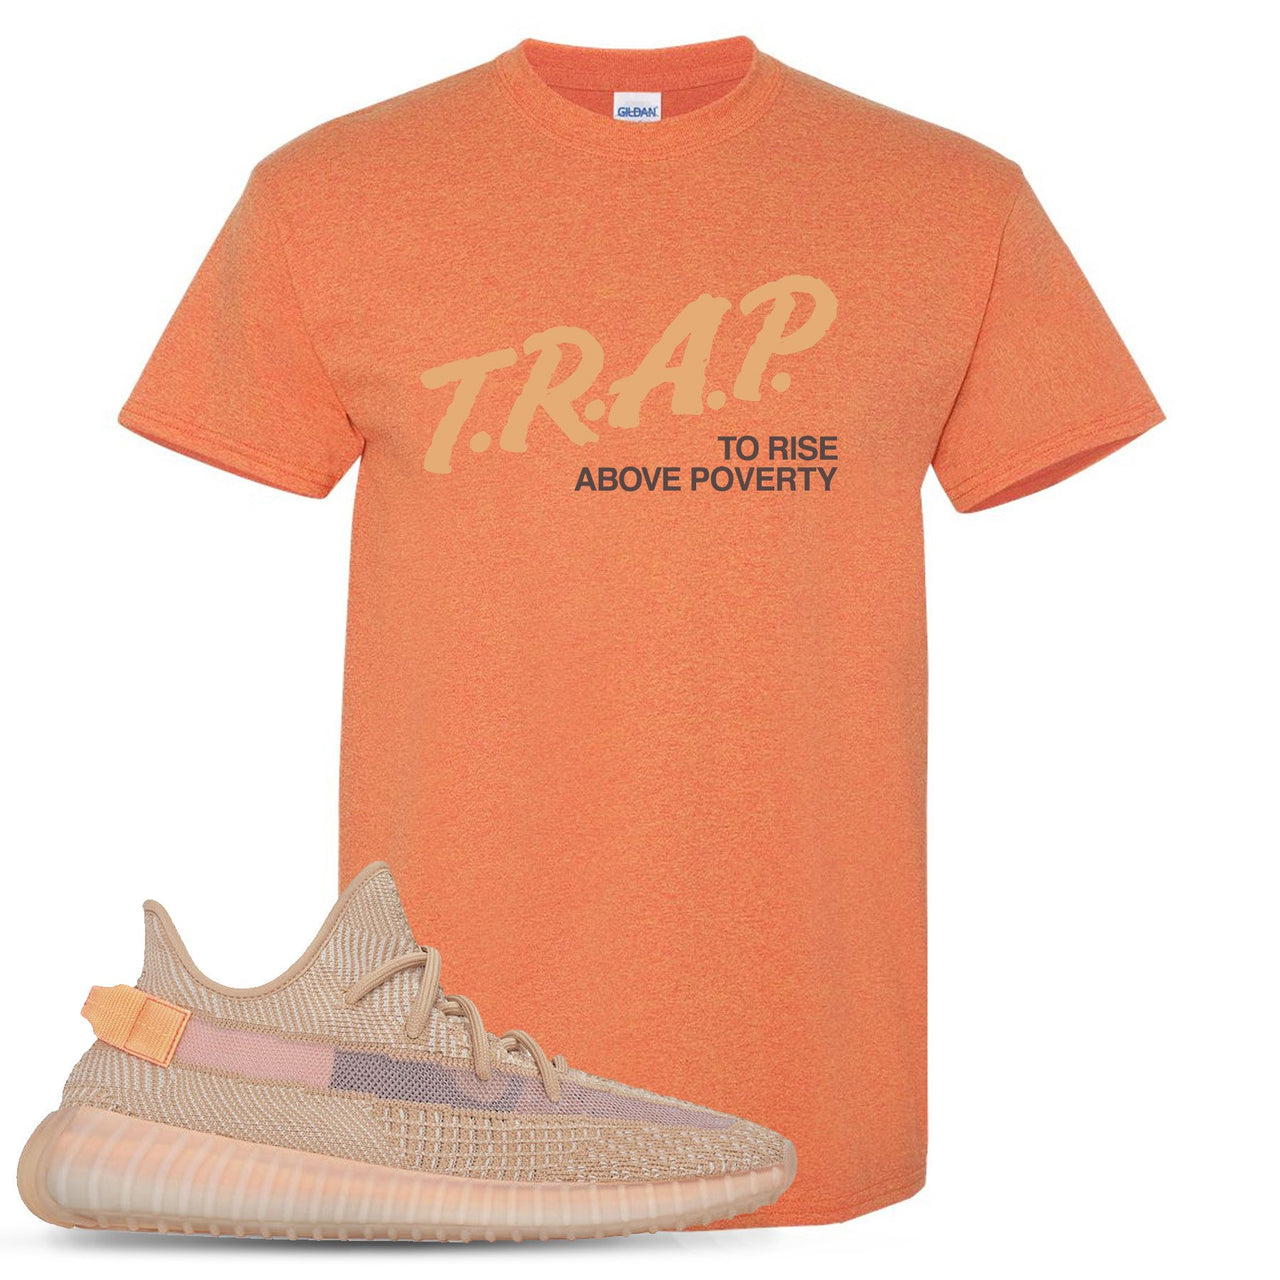 Clay v2 350s T Shirt | Trap To Rise Above Poverty, Heathered Sunset